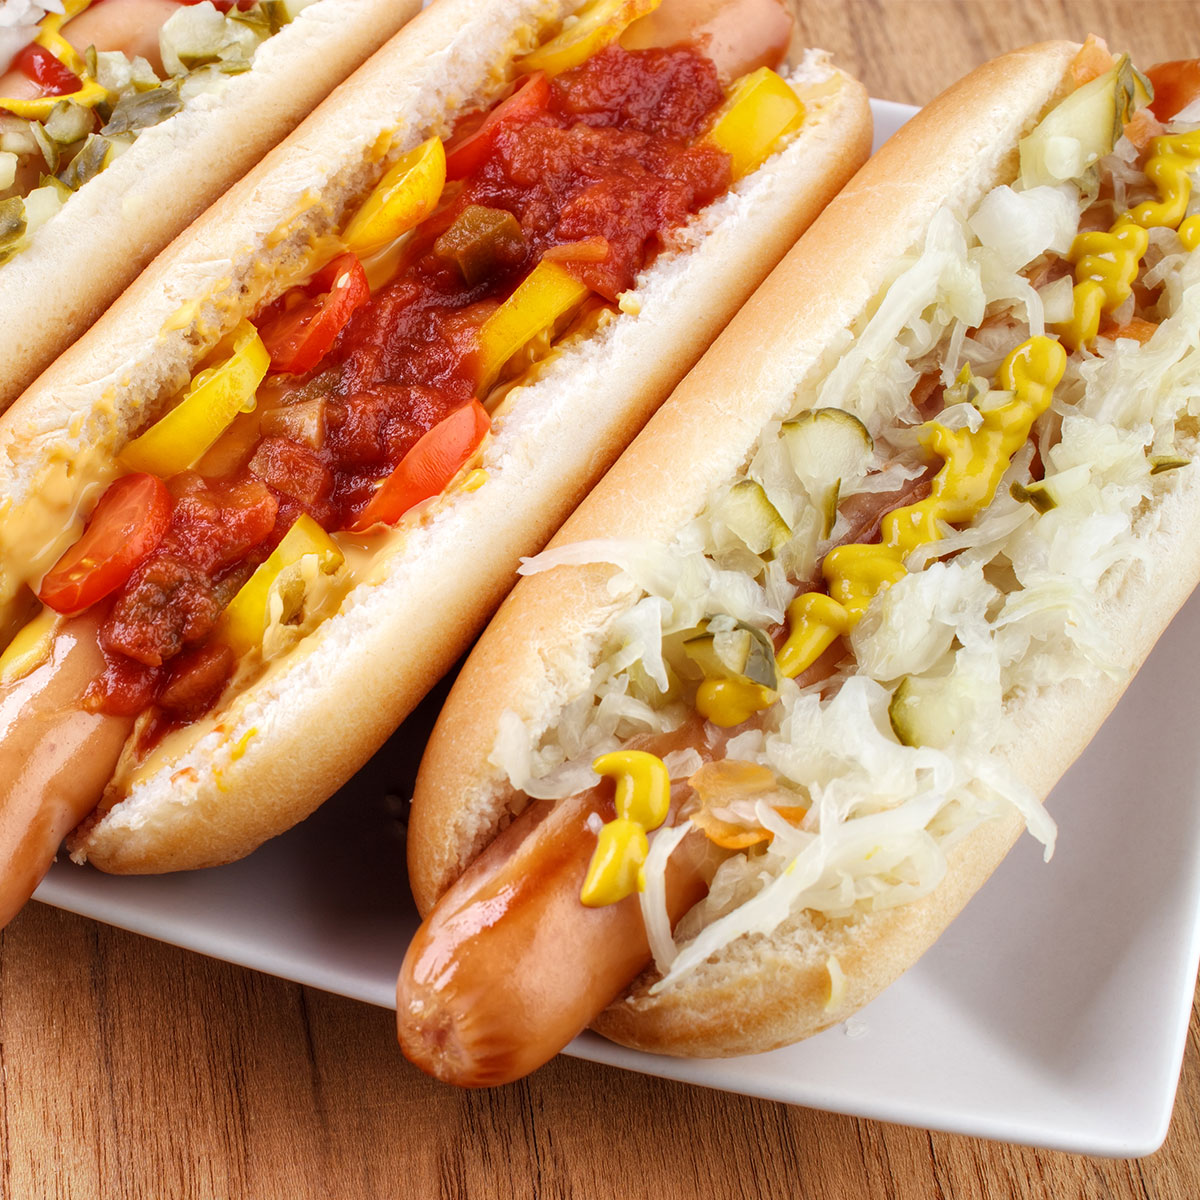 hot dogs topped with sauerkraut